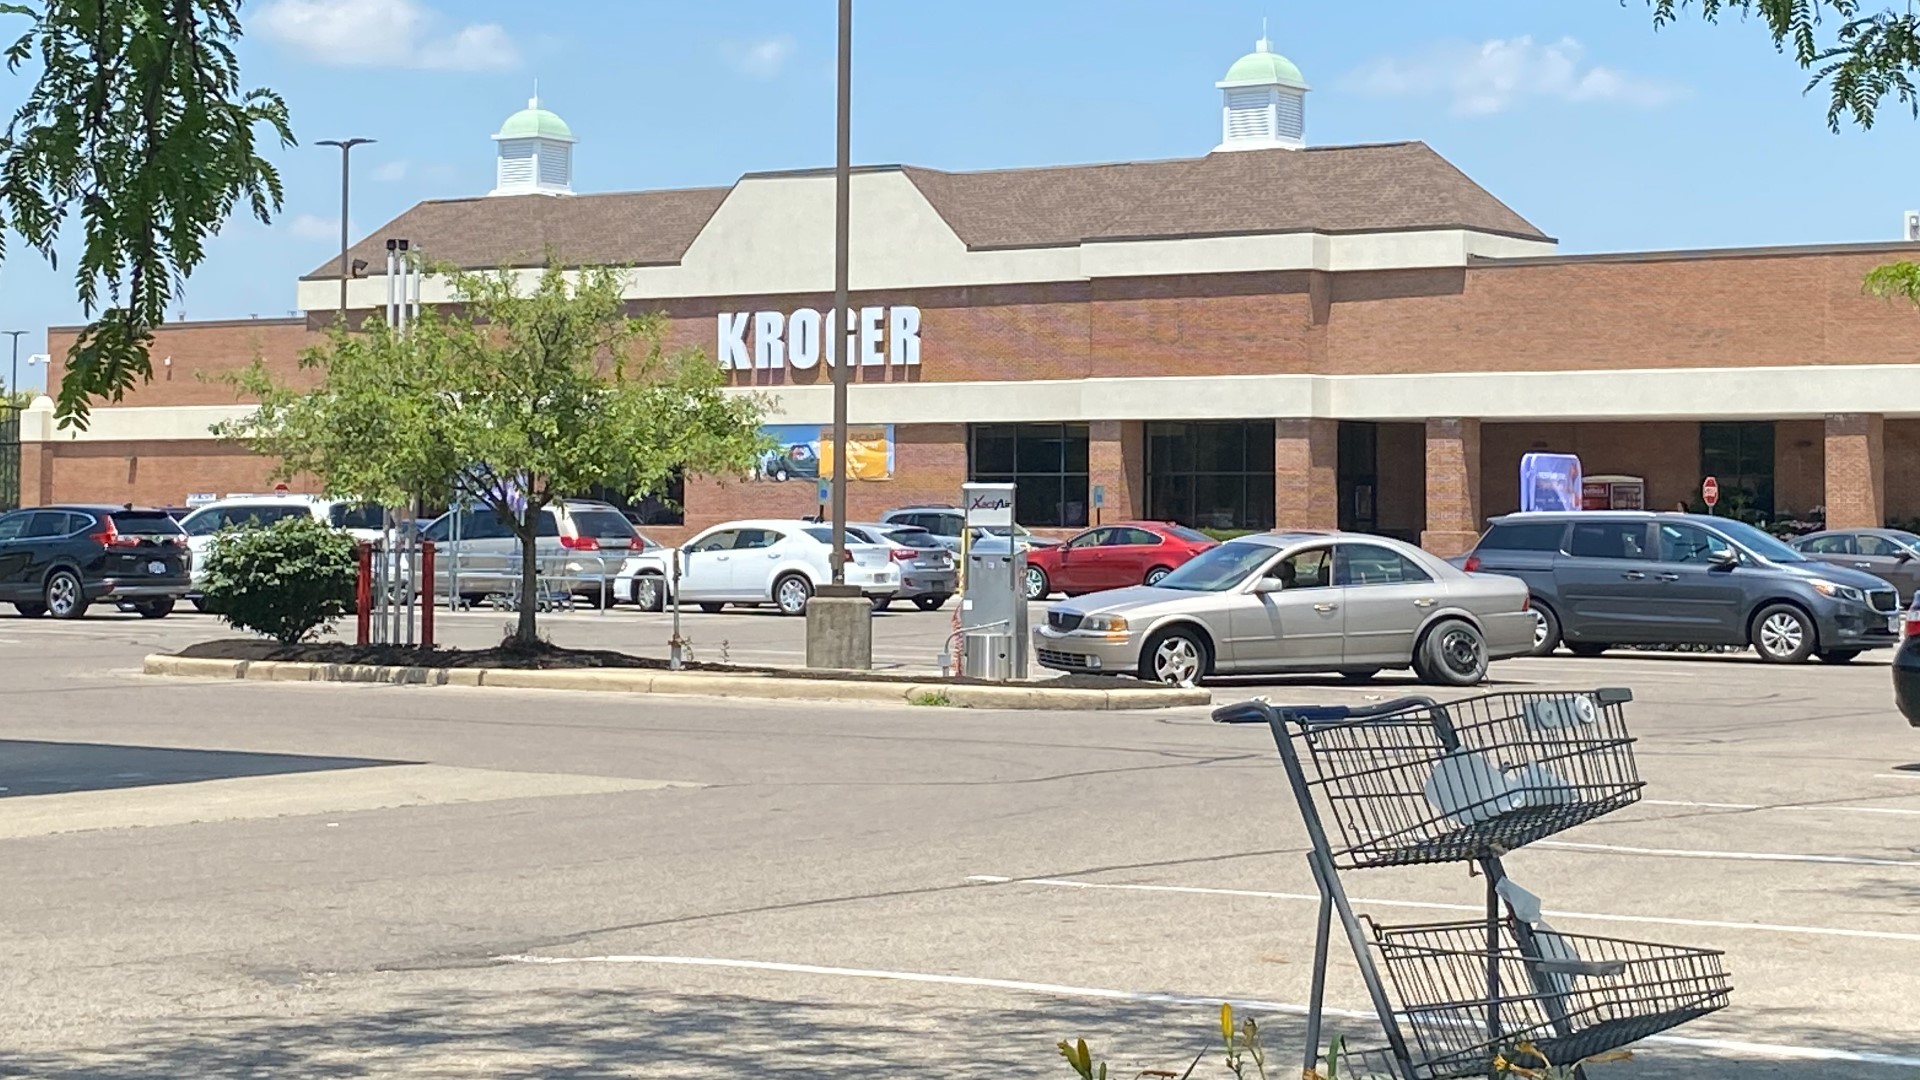 The incident happened June 17 in the parking lot of Kroger located on Bethel Road on the northwest side of Columbus.